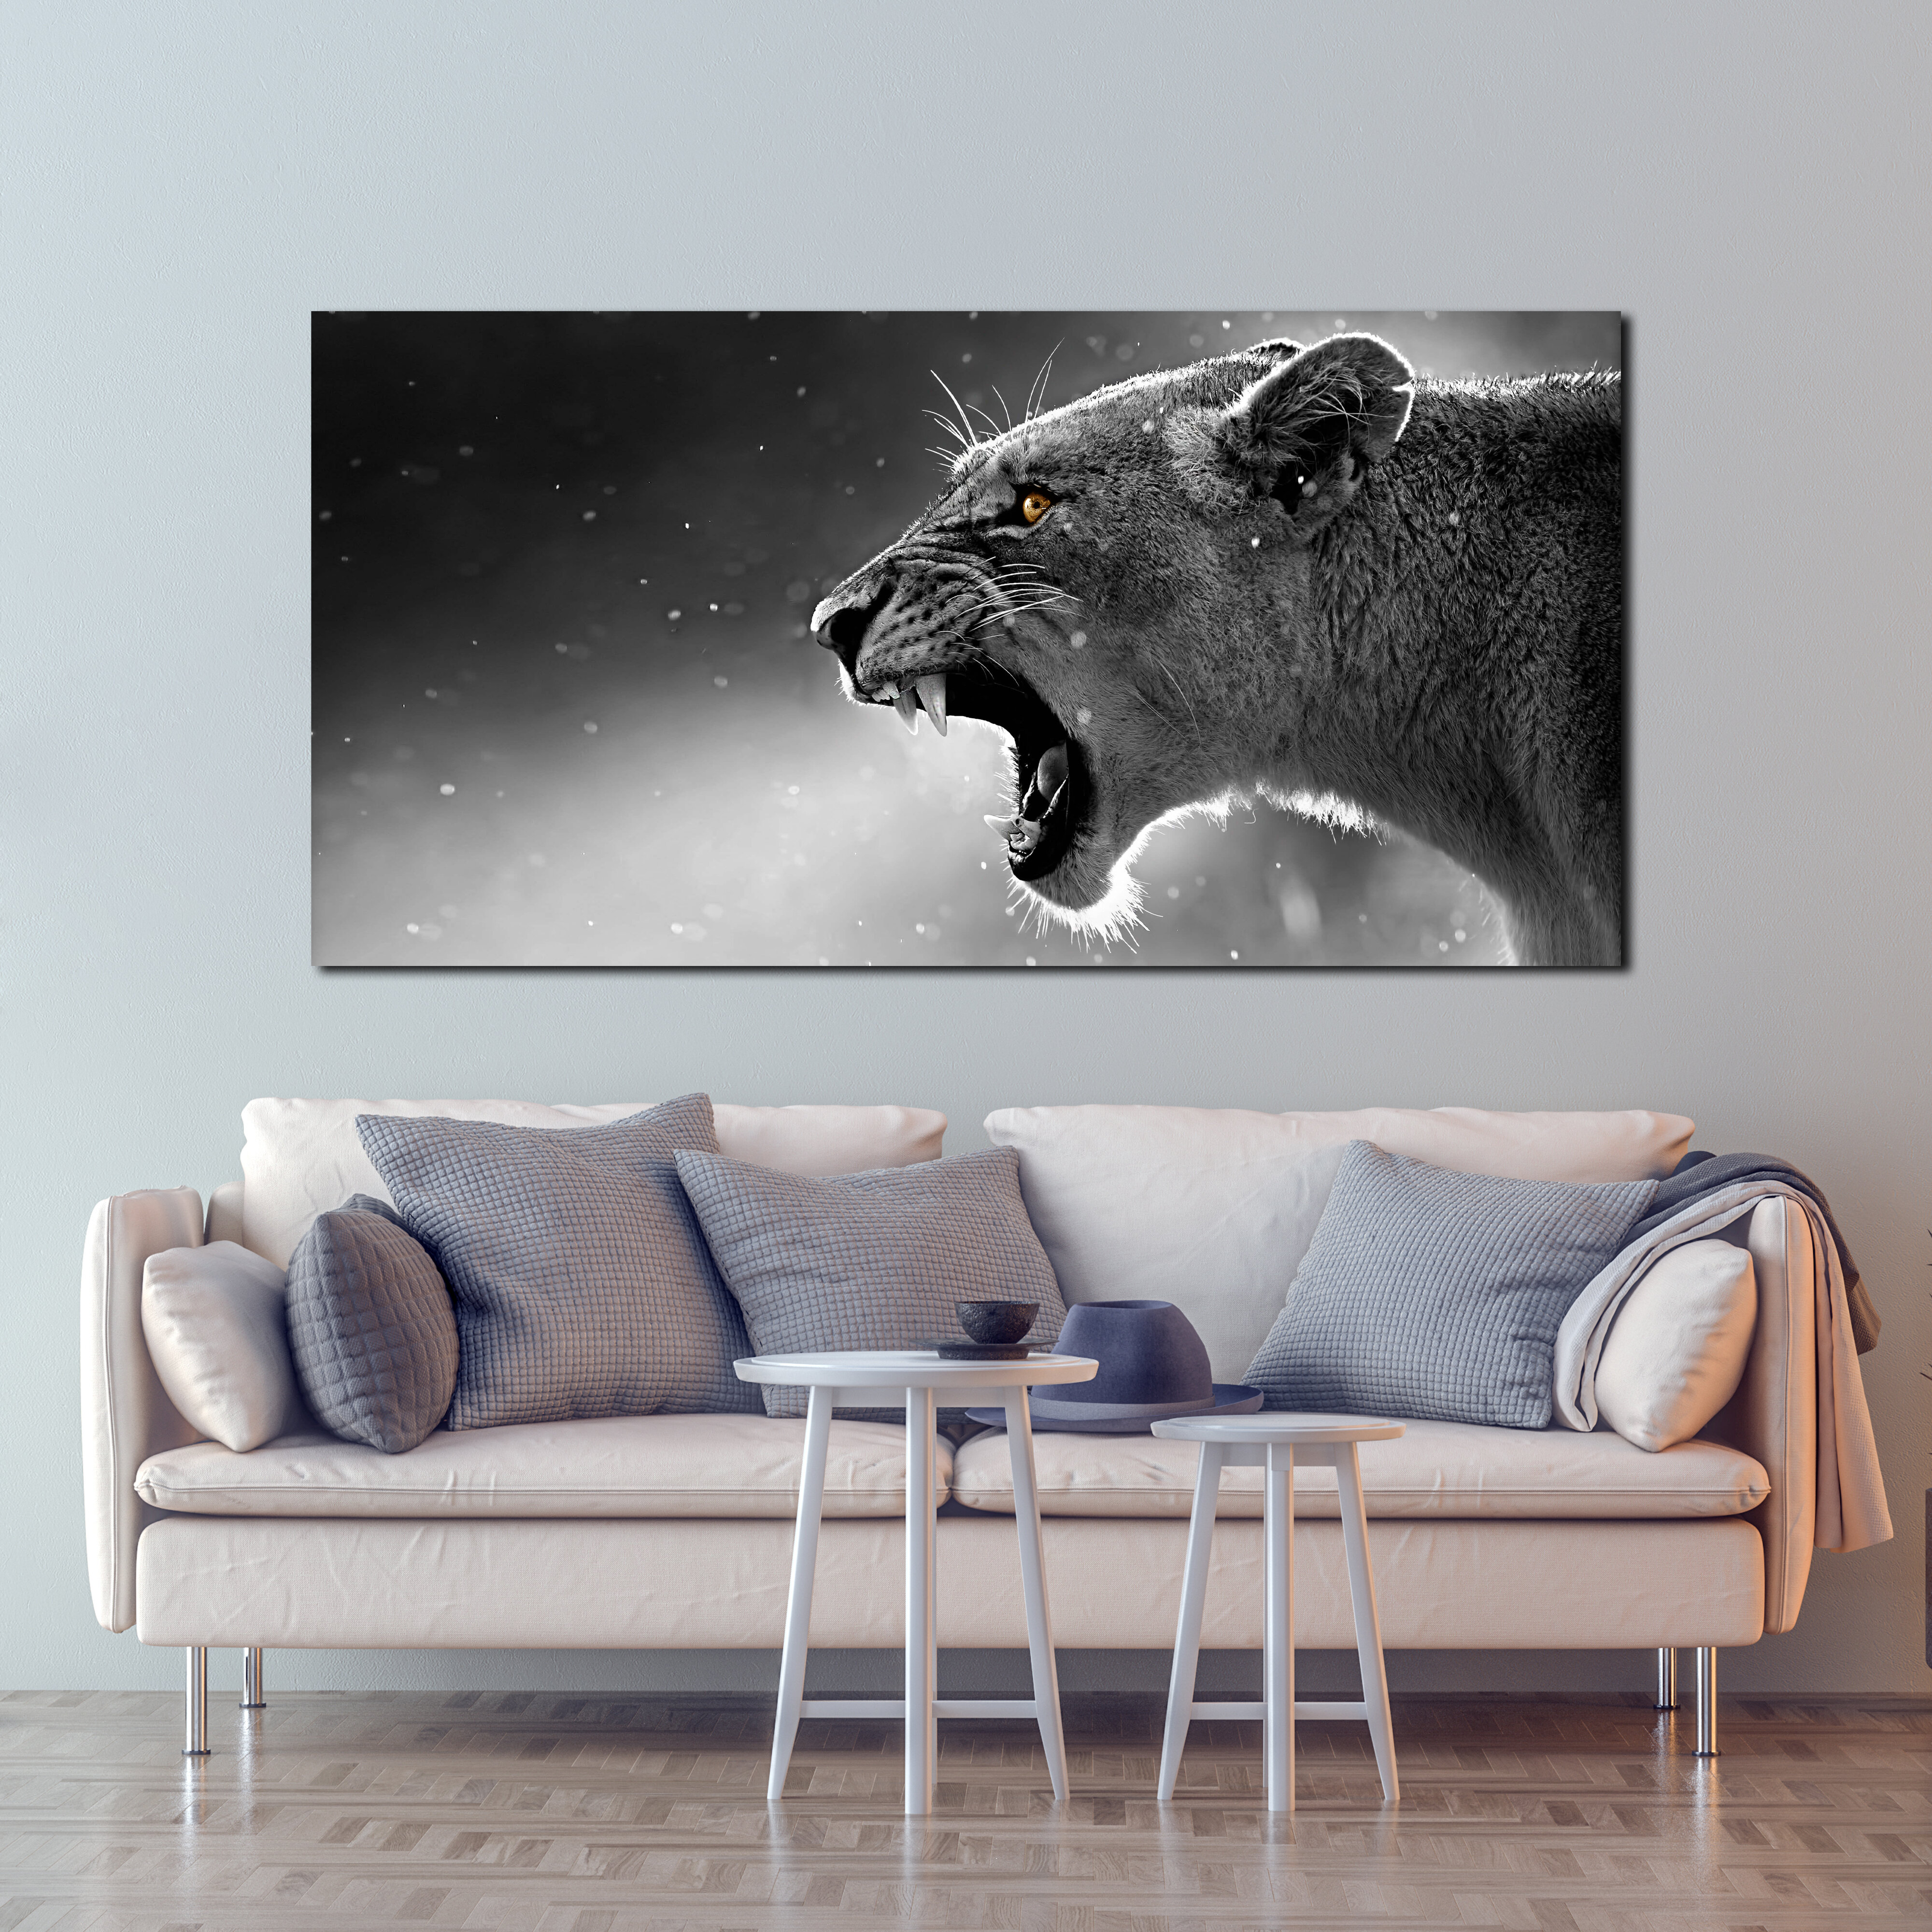 Angry Lion Tiger Canvas Print Animal Poster Unframed Wall Art Picture Home Decor 